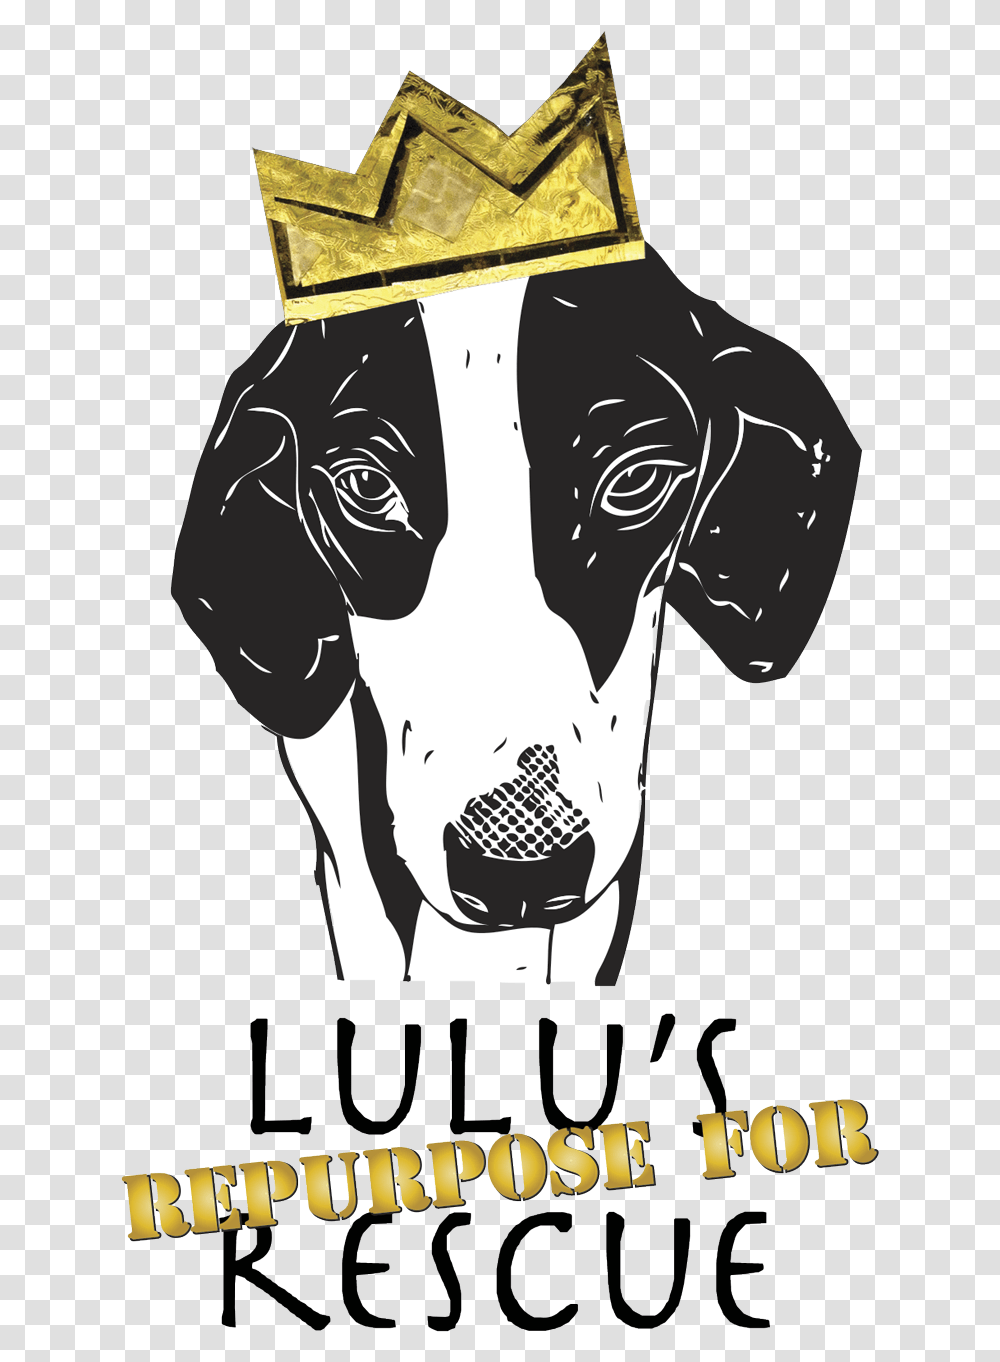 Lulu Repurpose For Rescue Poster, Advertisement, Mammal, Animal, Stencil Transparent Png